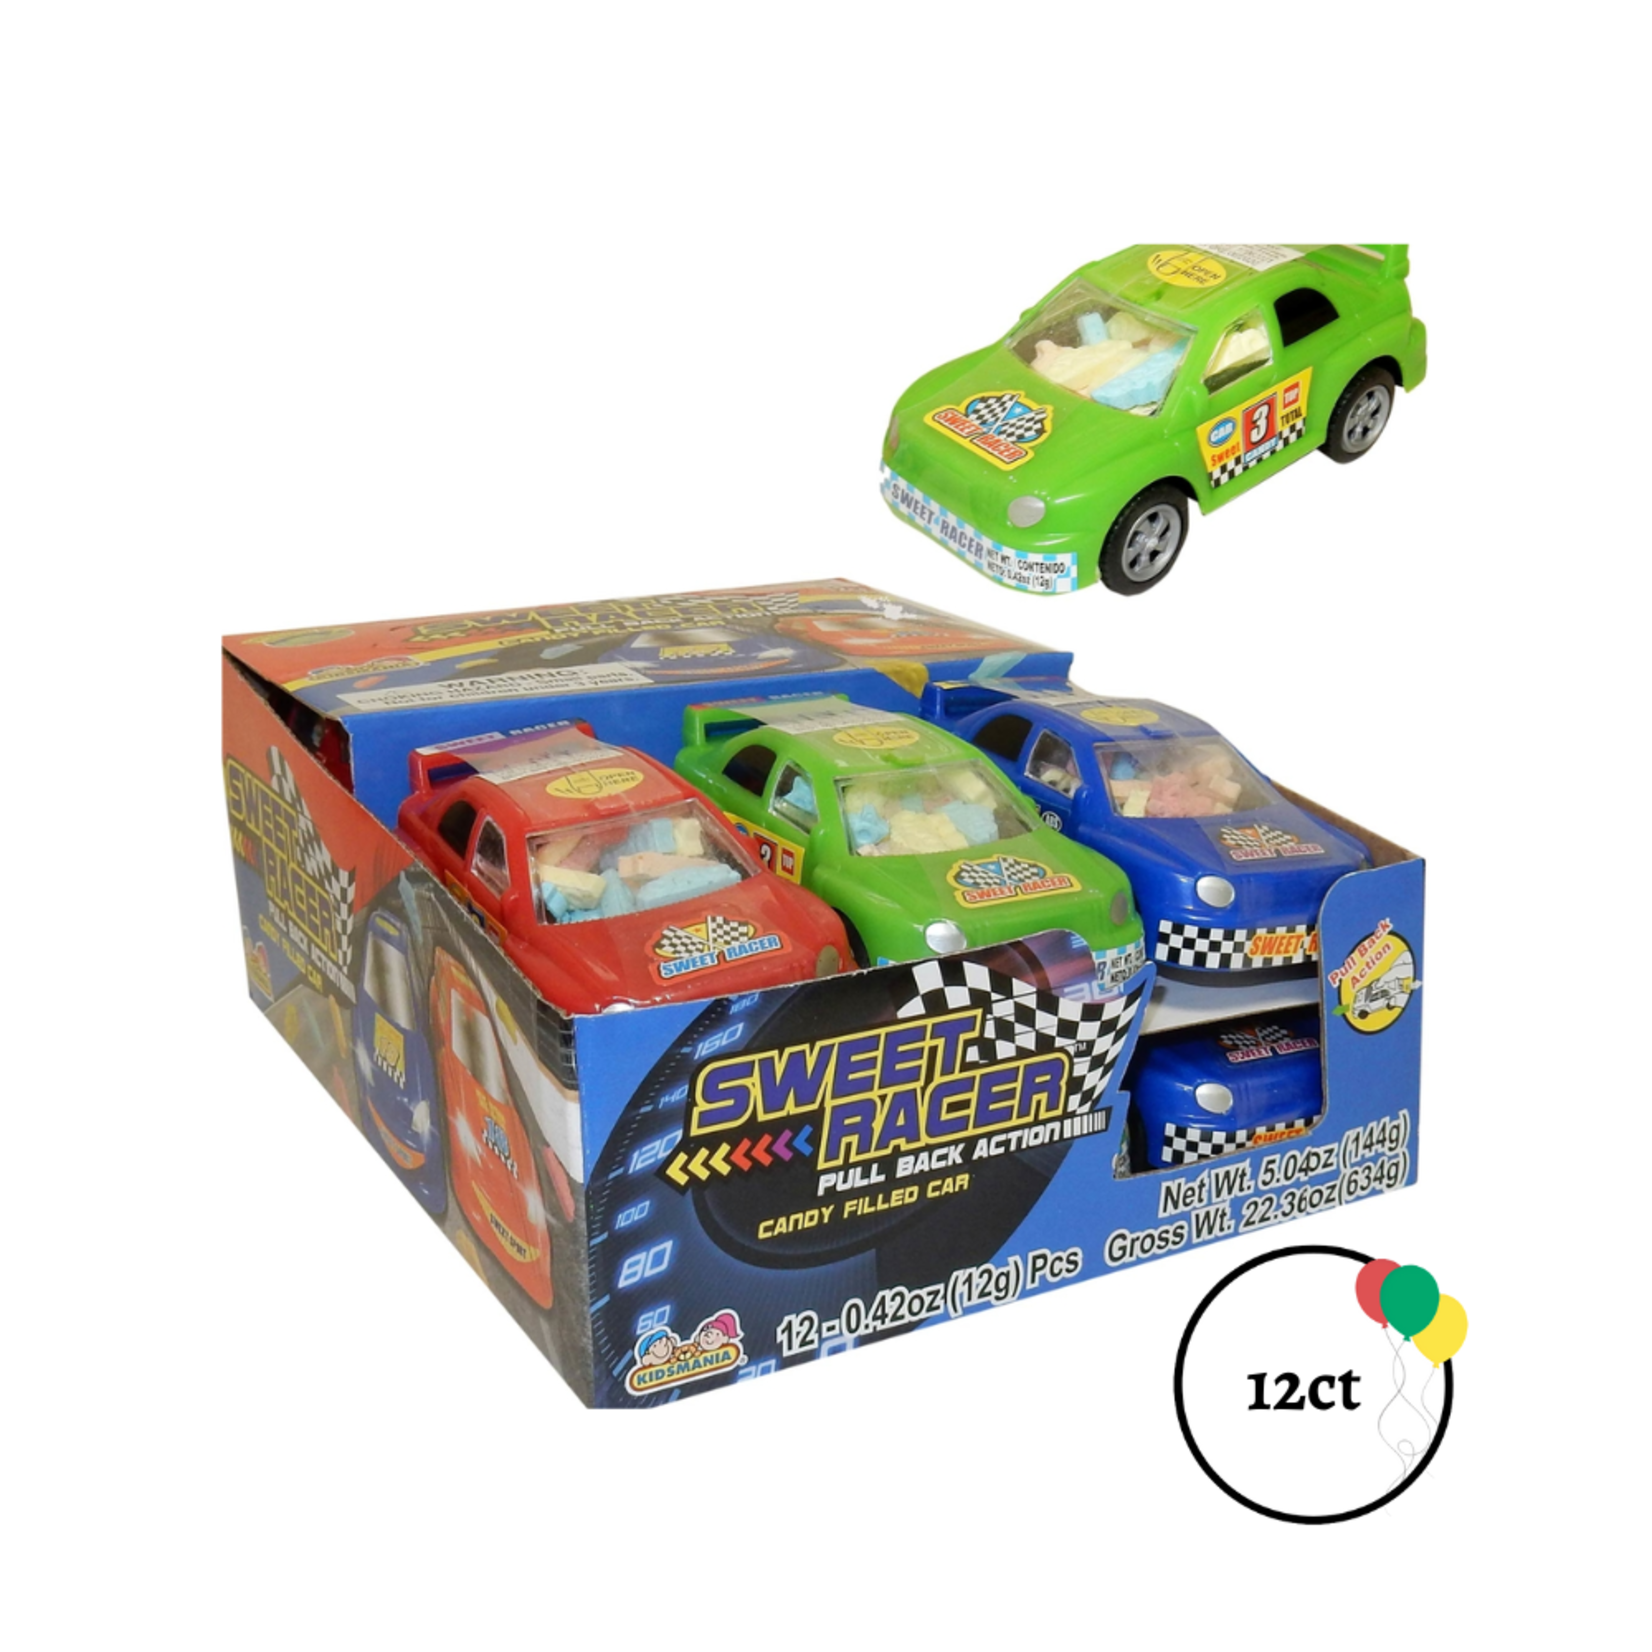 Kidsmania Sweet Racer Candy Filled Car 12ct.